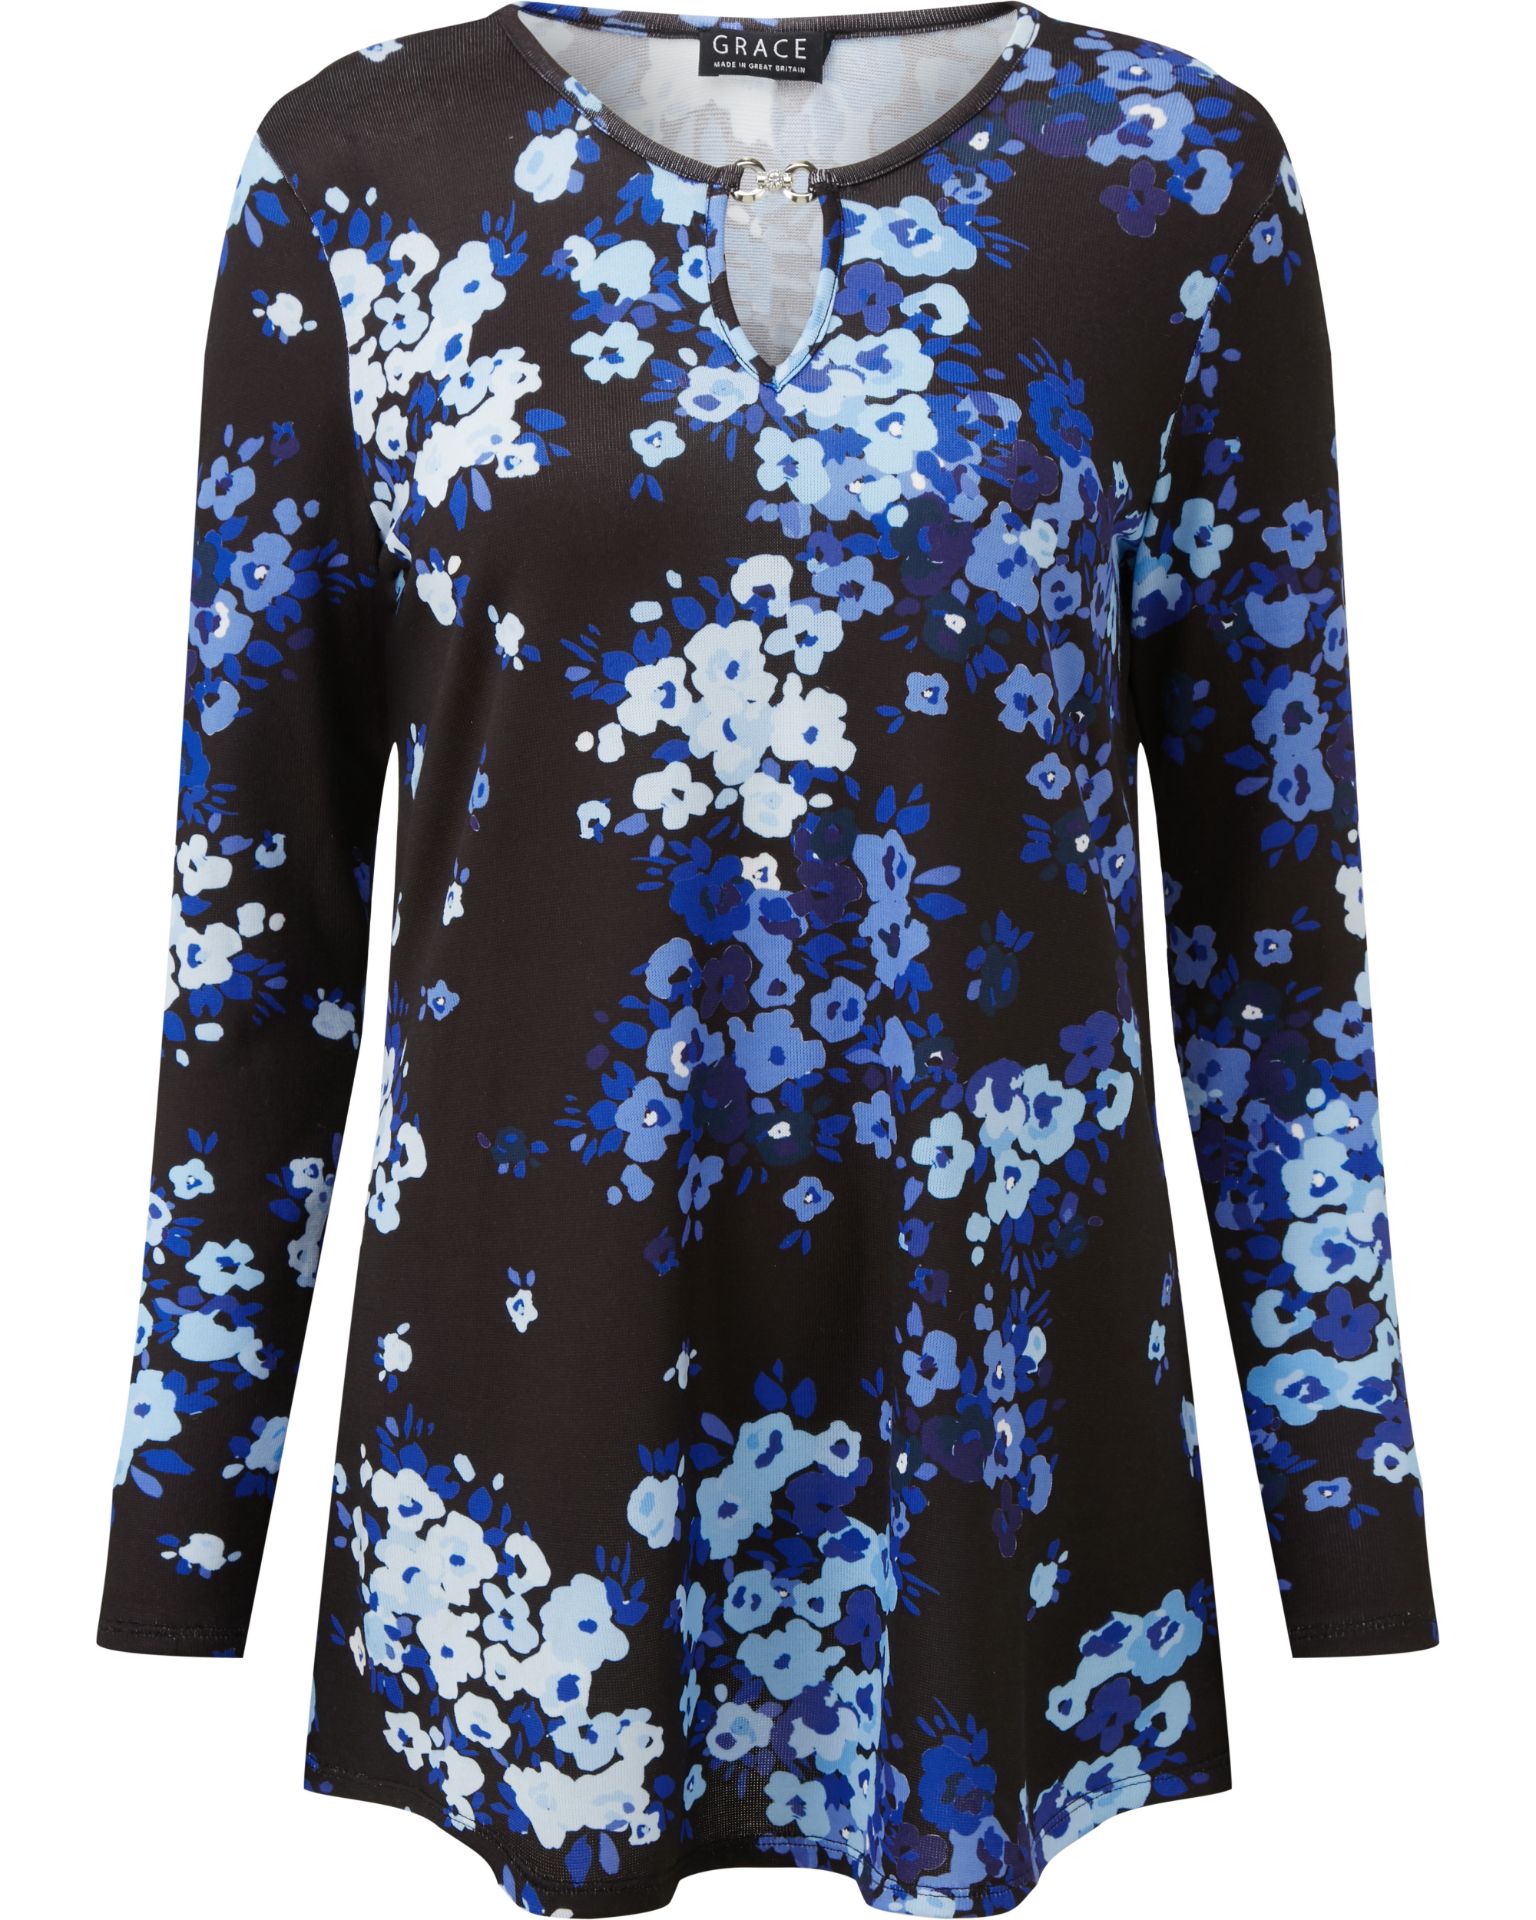 *Thirty Two Black & Blue Floral Blouses by Grace S